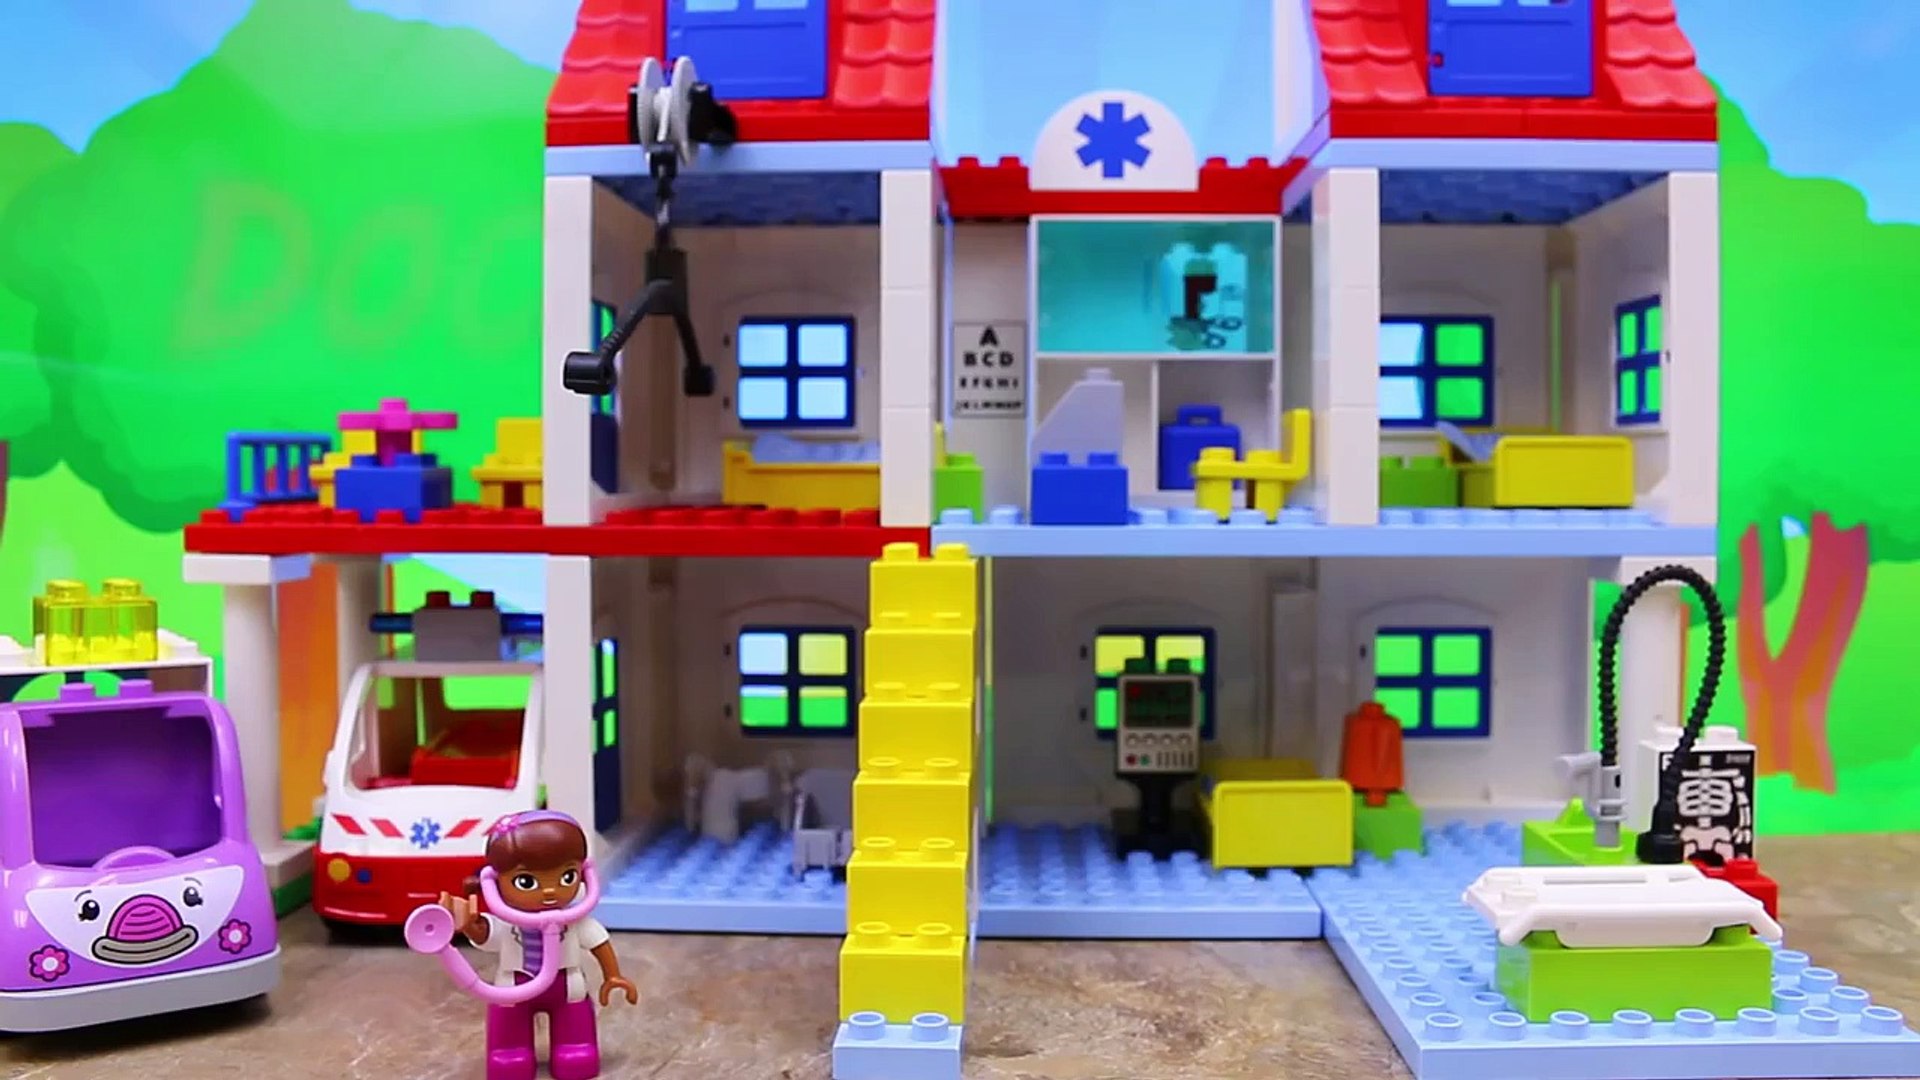 Doc McStuffins Duplo Lego Hospital with Superheroes Superman and Batman  with Spiderman - Dailymotion Video